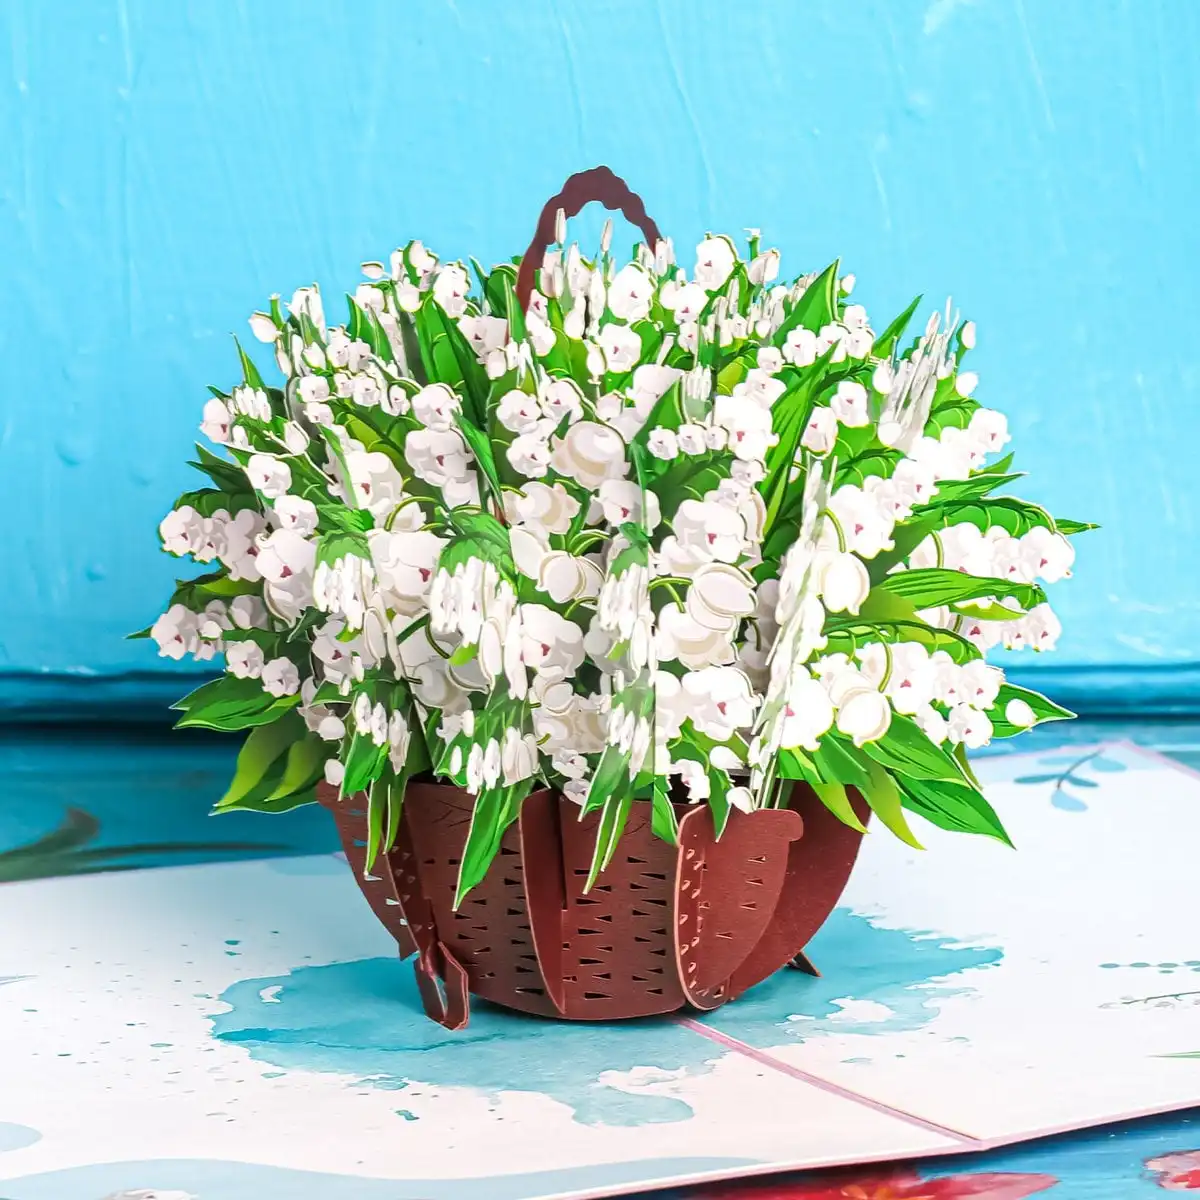 Lilies of the Valley Basket Pop Up Card with envelopes pop up card birthday 3d birthday greeting card laser cut custom design